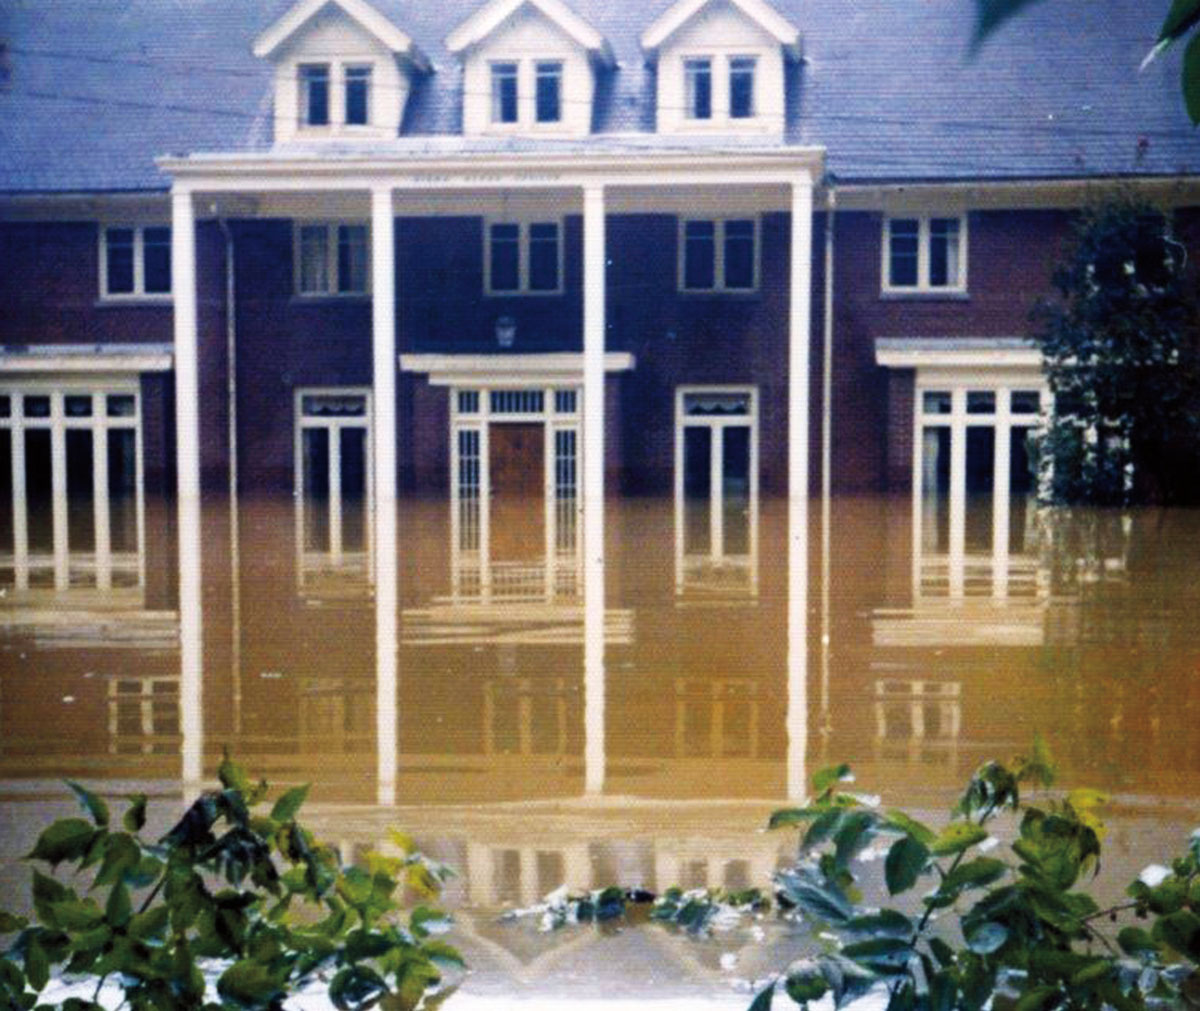 Lewisburg resident Owen Mahon image of flooded building